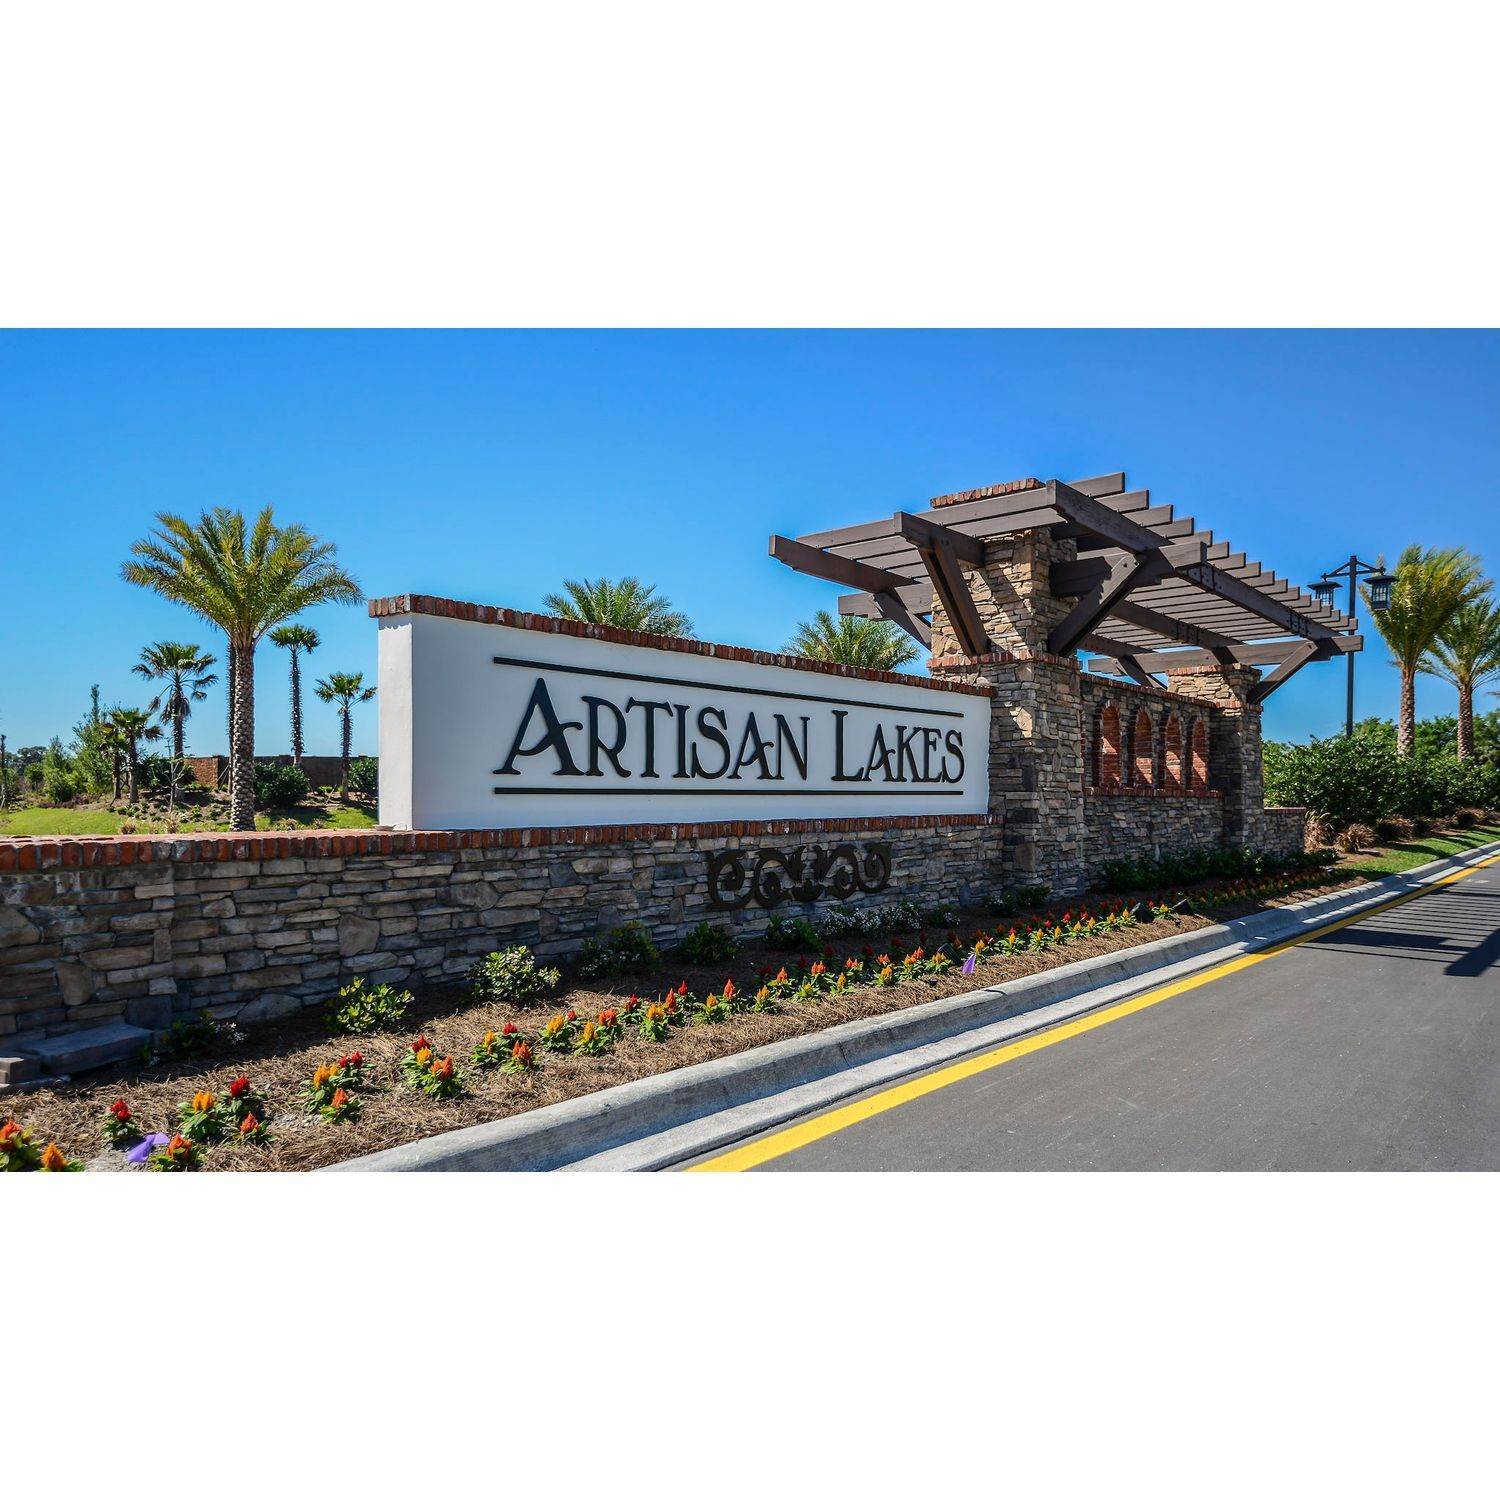 12. Eave's Bend at Artisan Lakes xây dựng tại 5967 Maidenstone Way, Palmetto, FL 34221